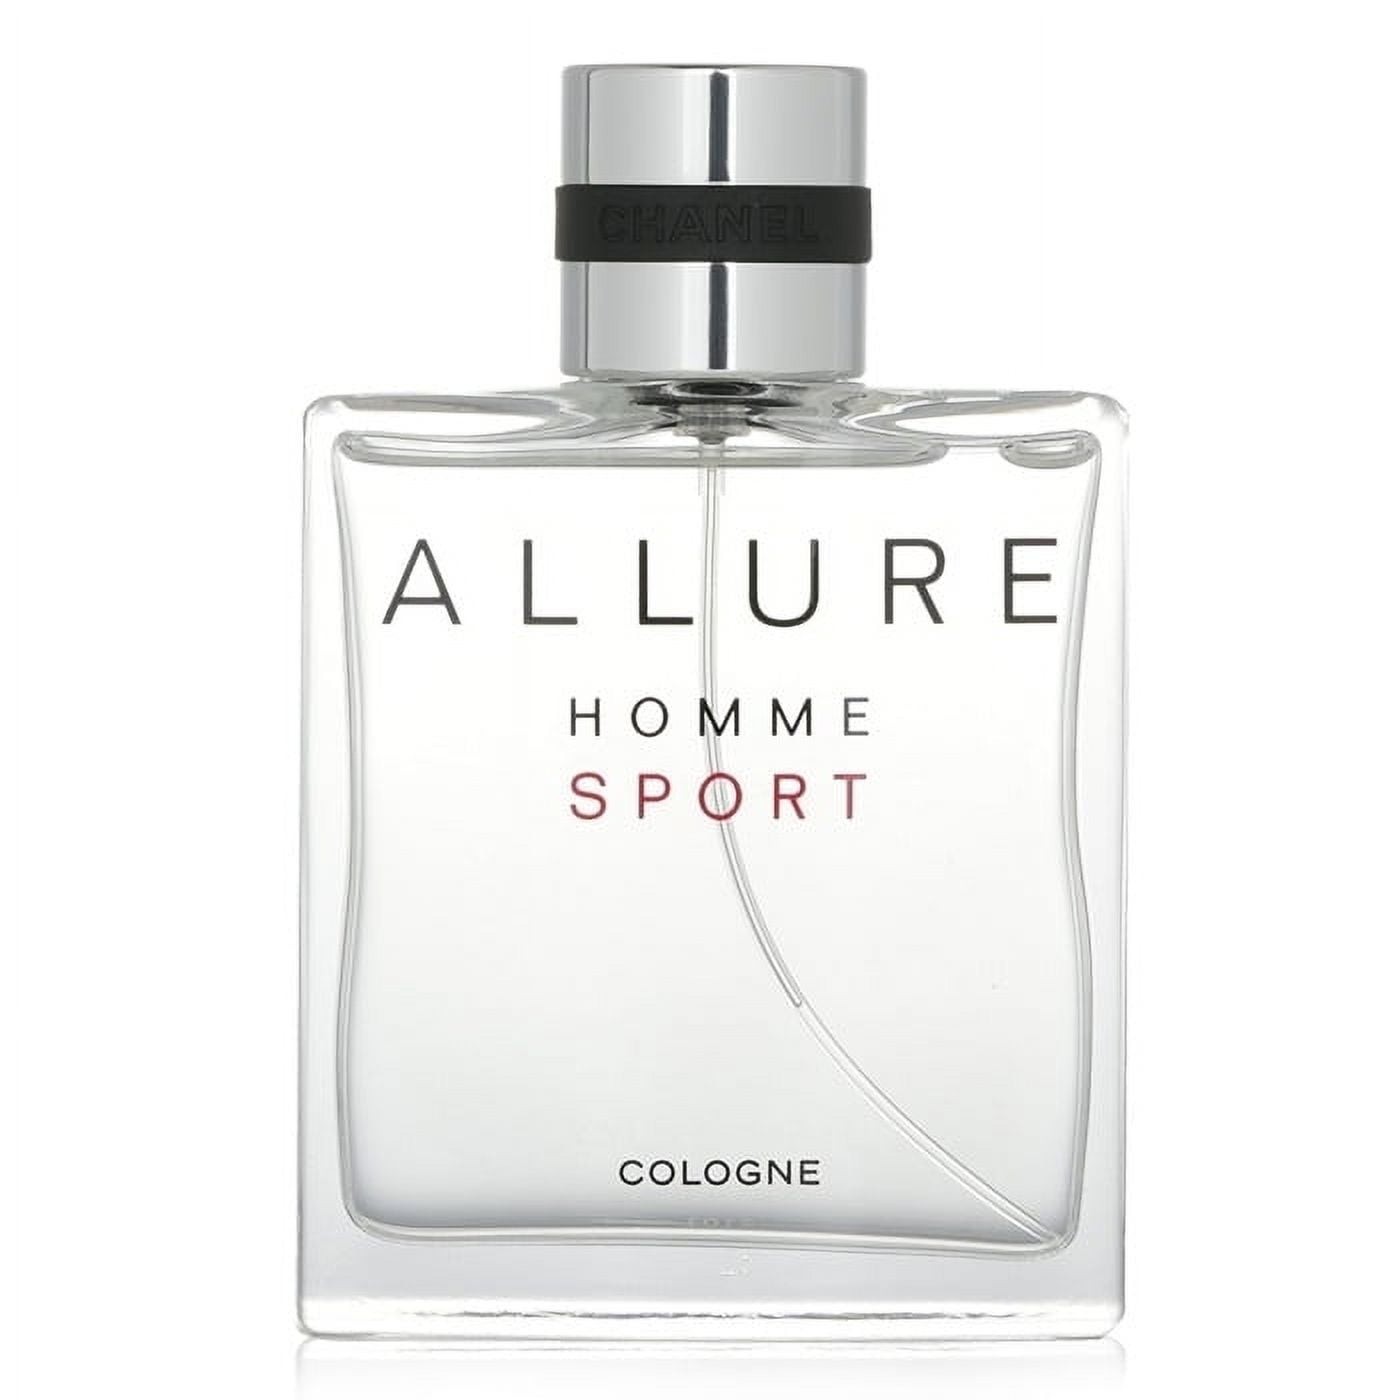 Chanel Allure Homme Sport Cologne Twist And Spray - Aqua